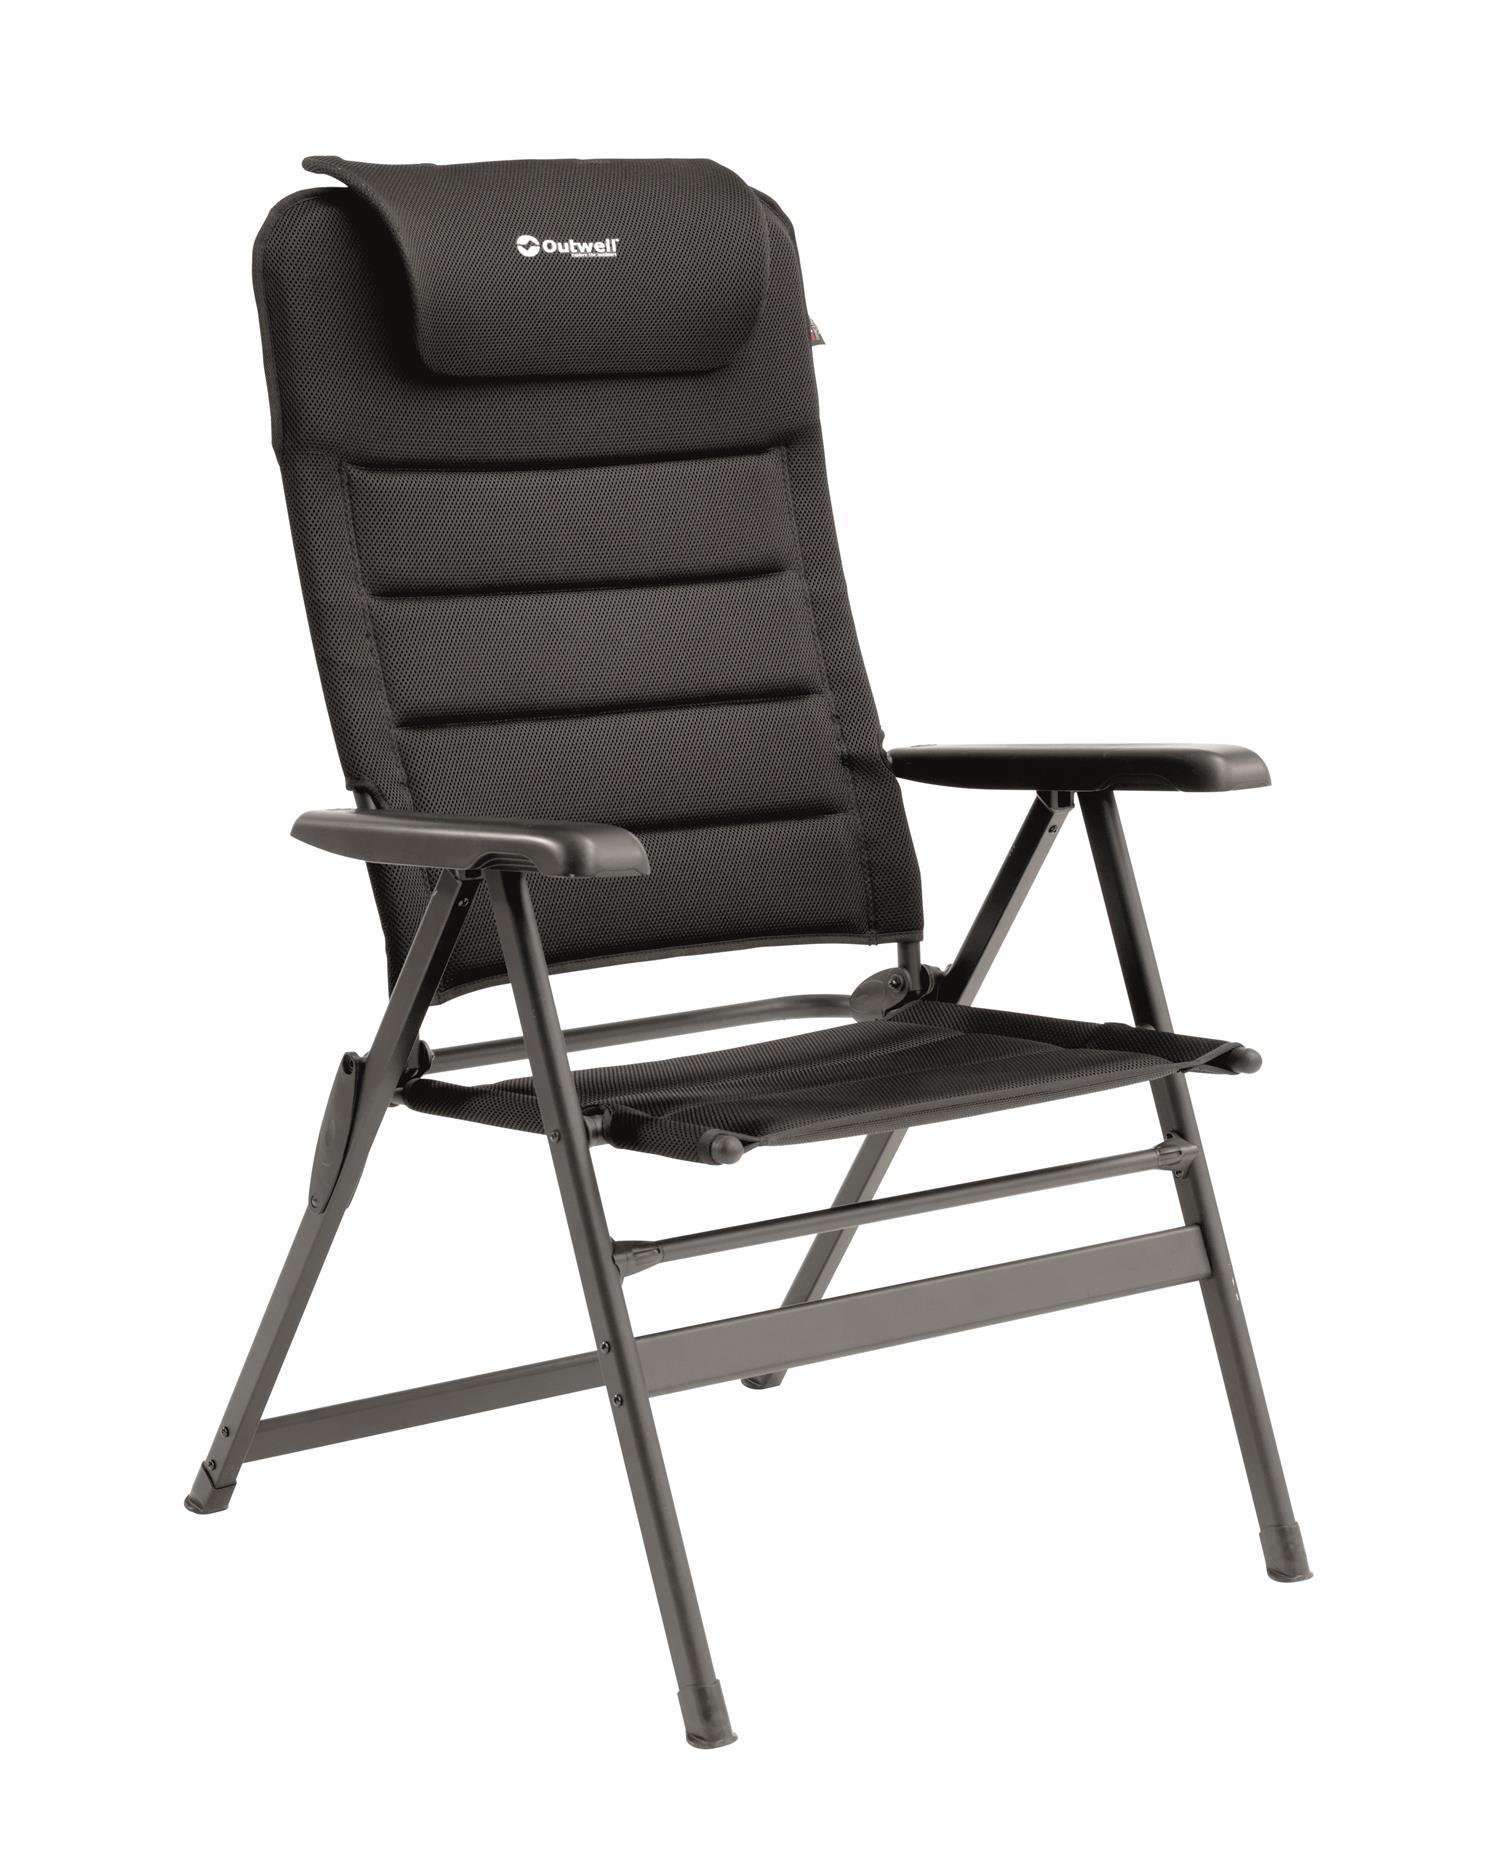 Outwell Grand Canyon camping chair